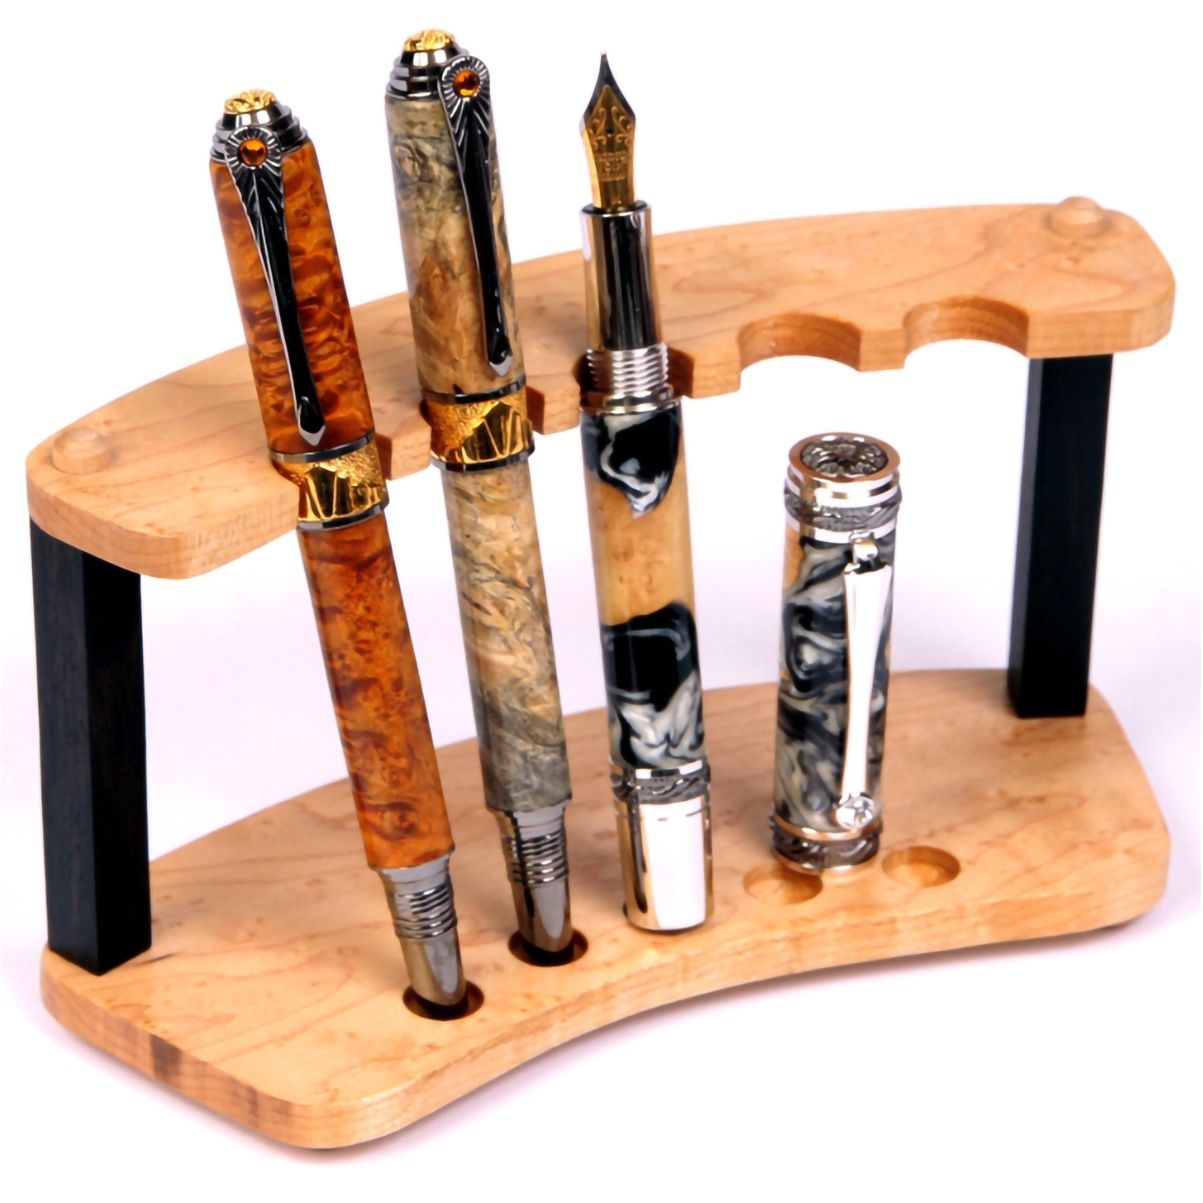 5 Pens Maple and Ebony Upright Pen Stand by Lanier Pens